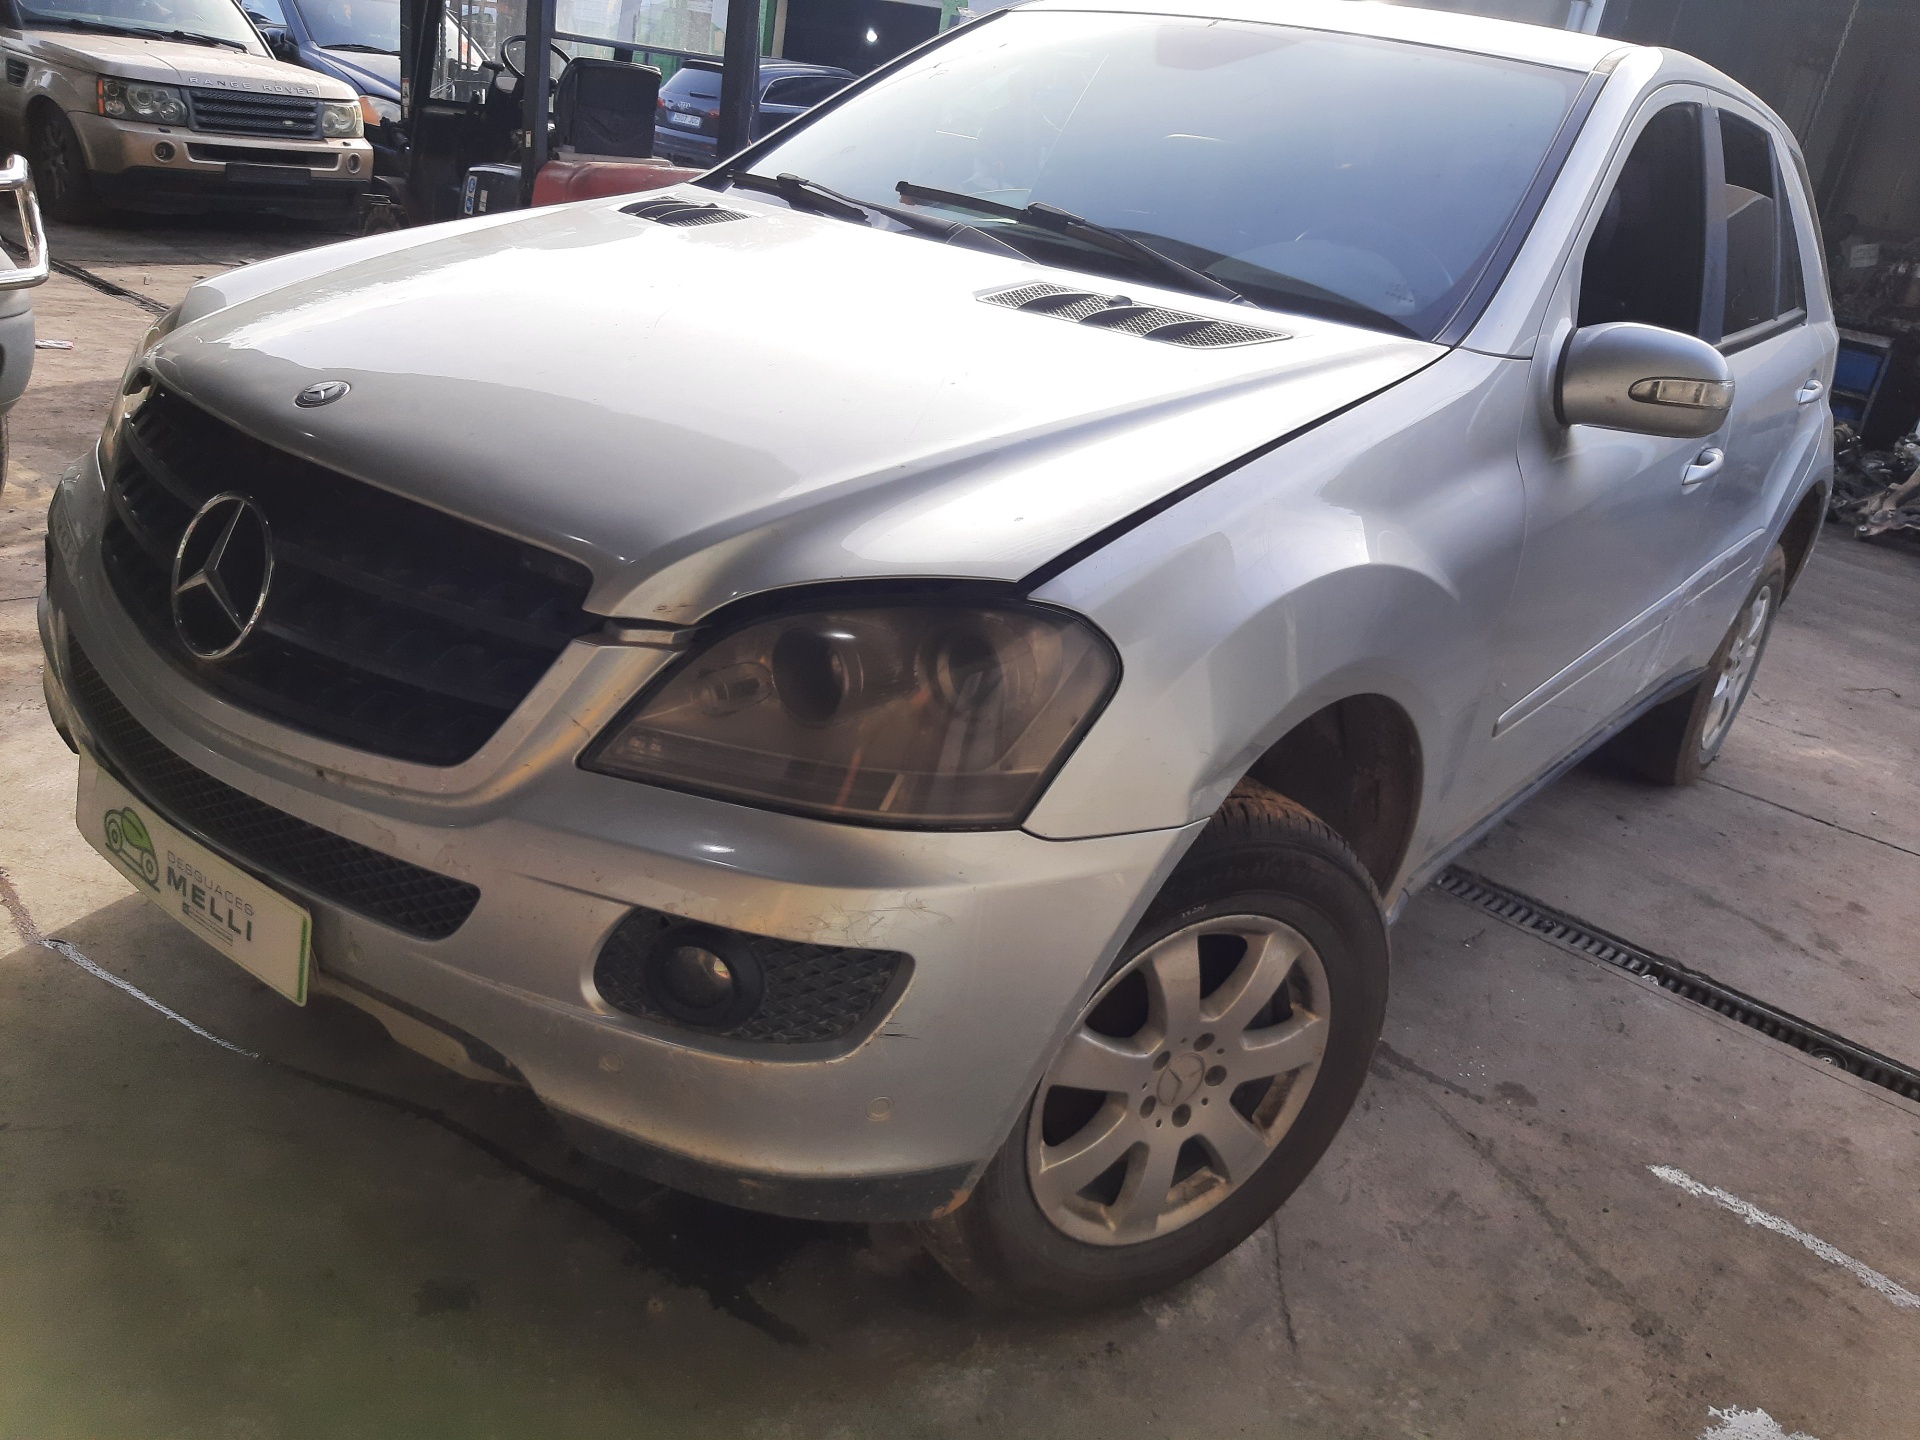 MERCEDES-BENZ M-Class W164 (2005-2011) Other Body Parts 164300000464 23373943